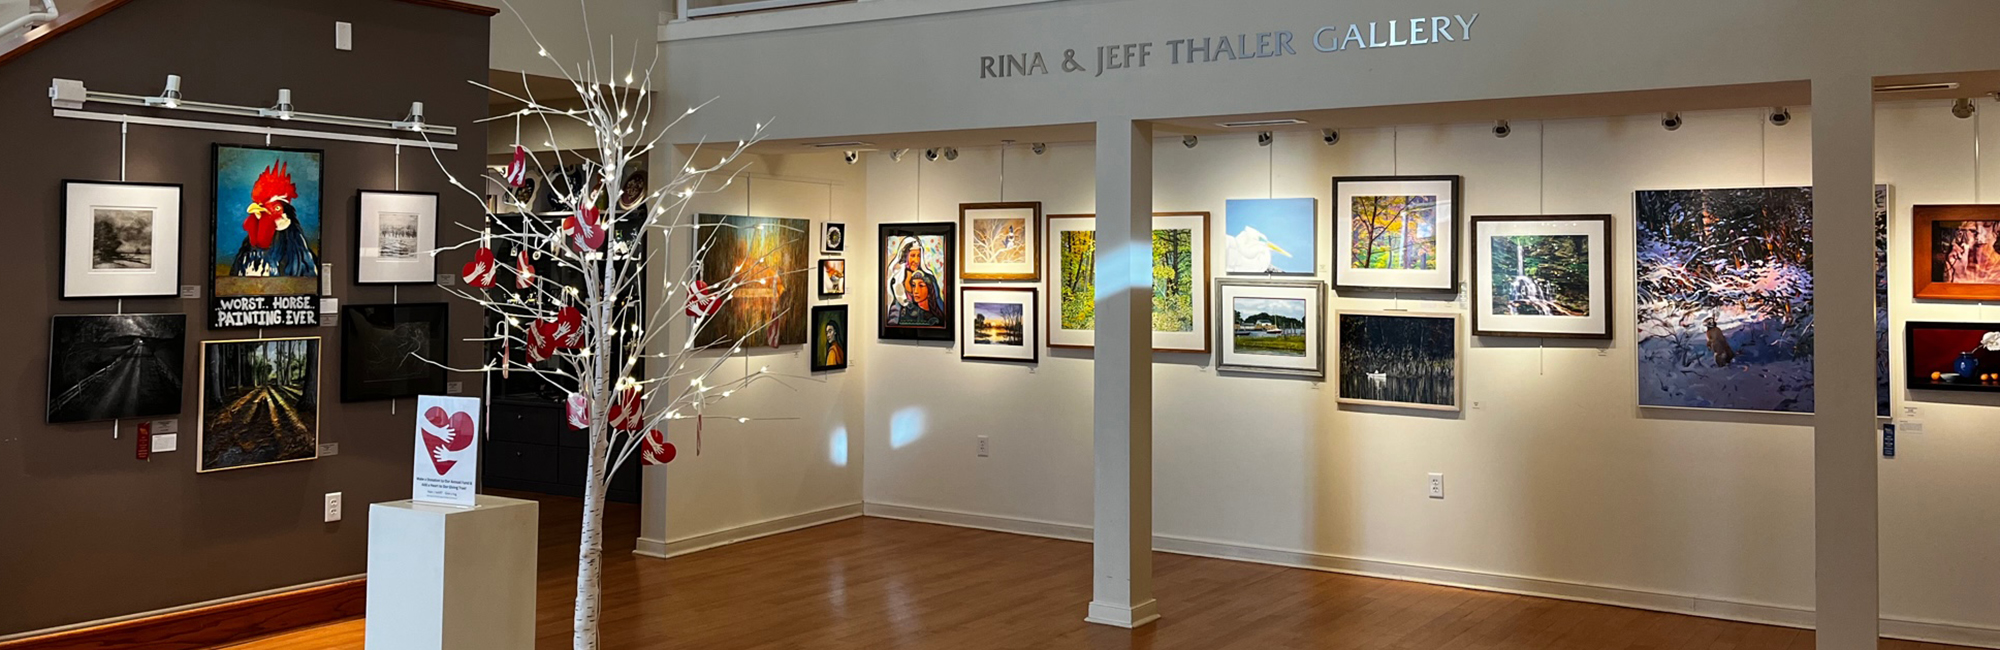 Featured in the Thaler Gallery / Member's Juried Show